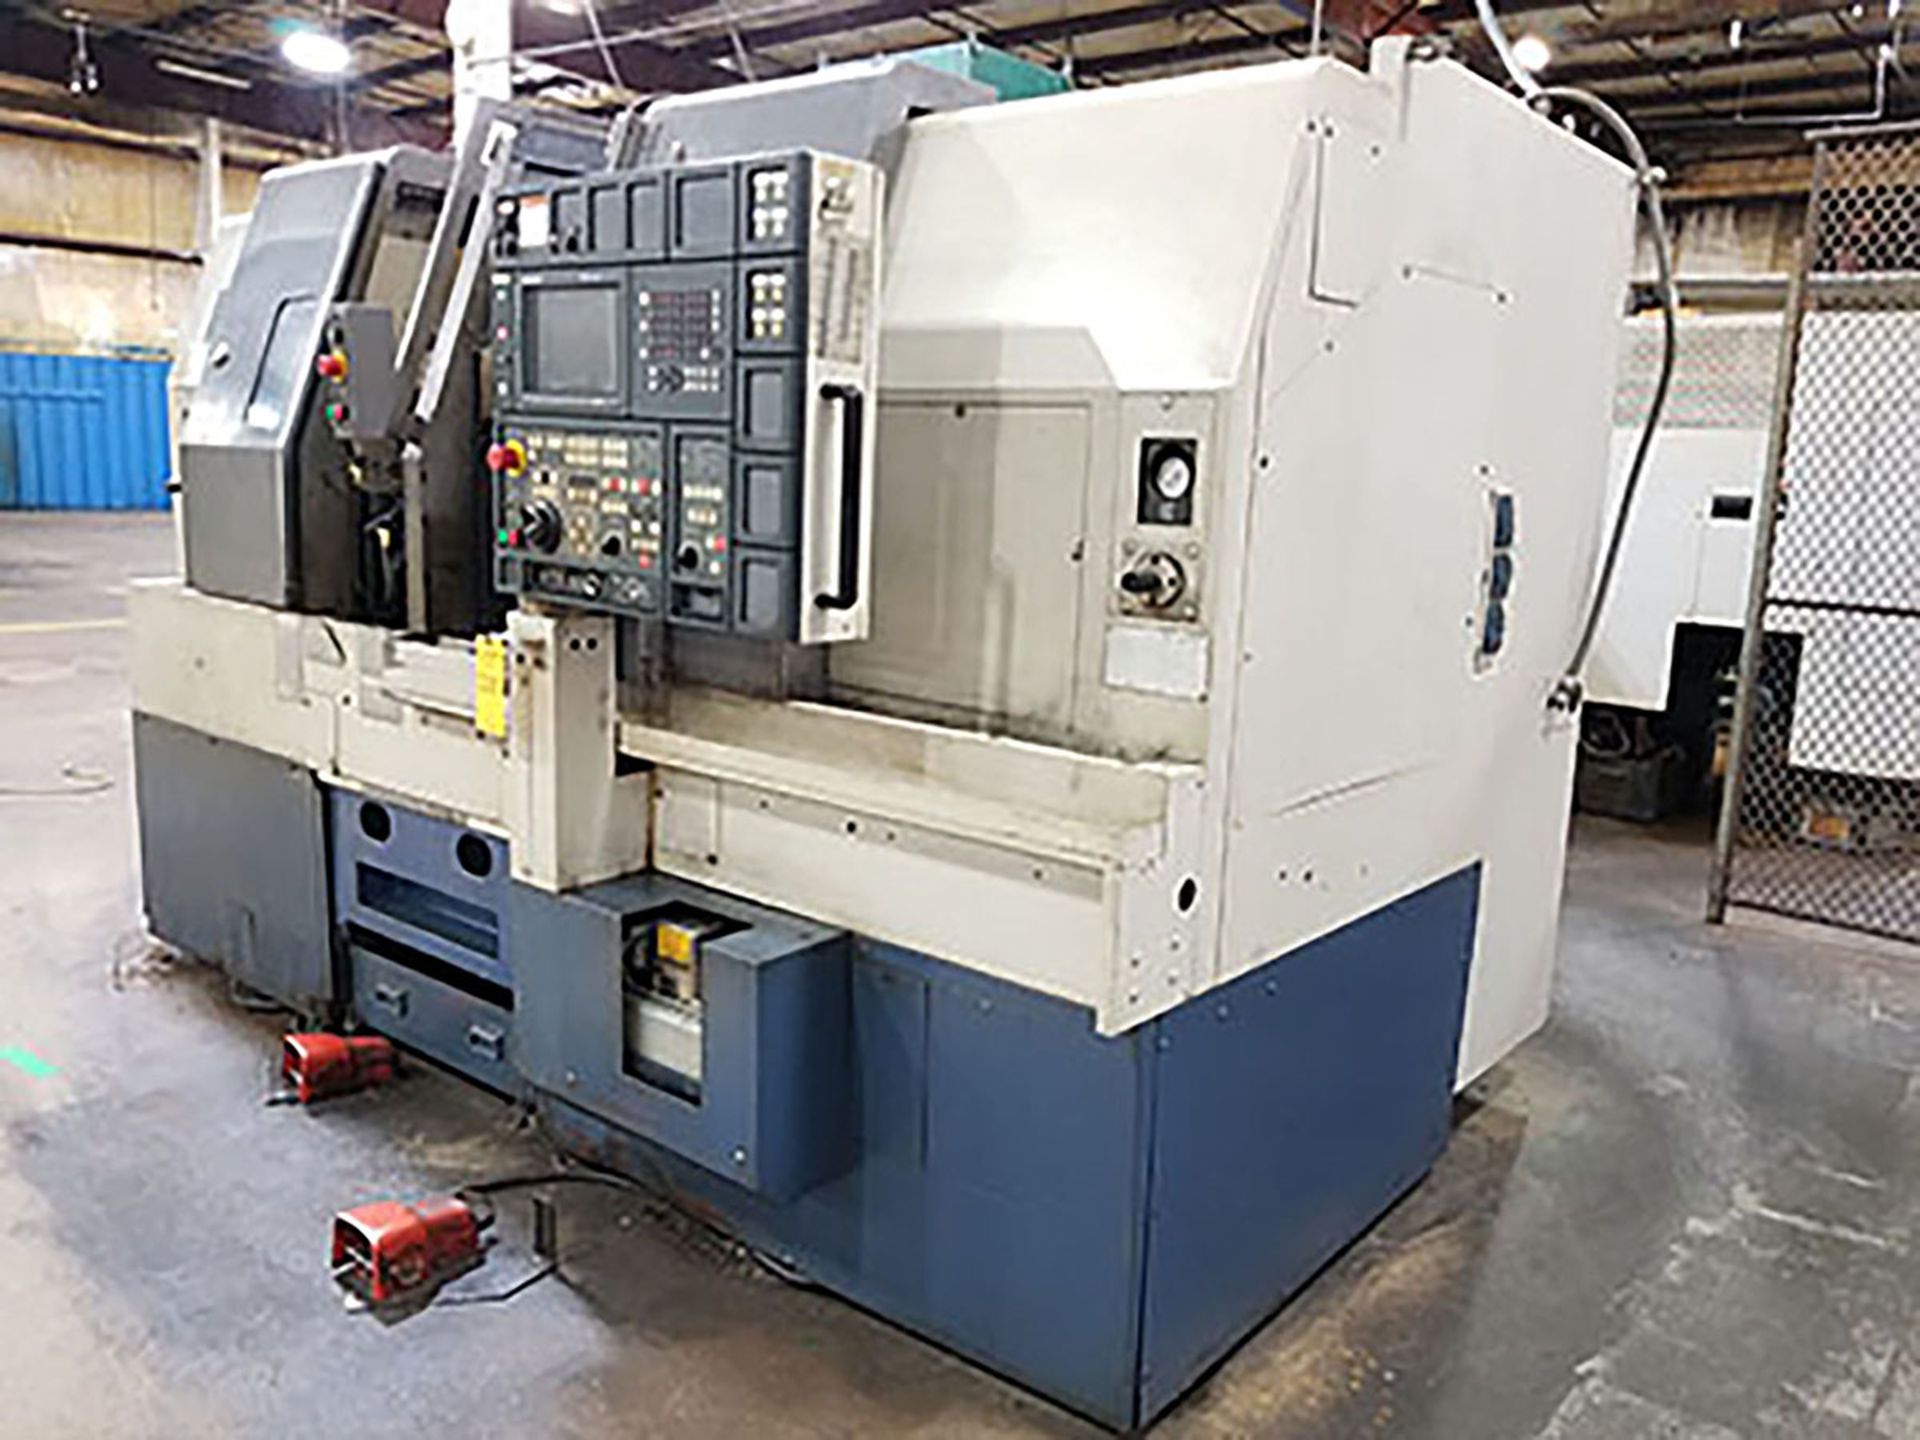 2000 MORI SEKI DL151 4-AXIS CNC TURNING CENTER; DUAL SPINDLE, (2) 12-POSITION TURRET, COOLANT, - Image 3 of 10